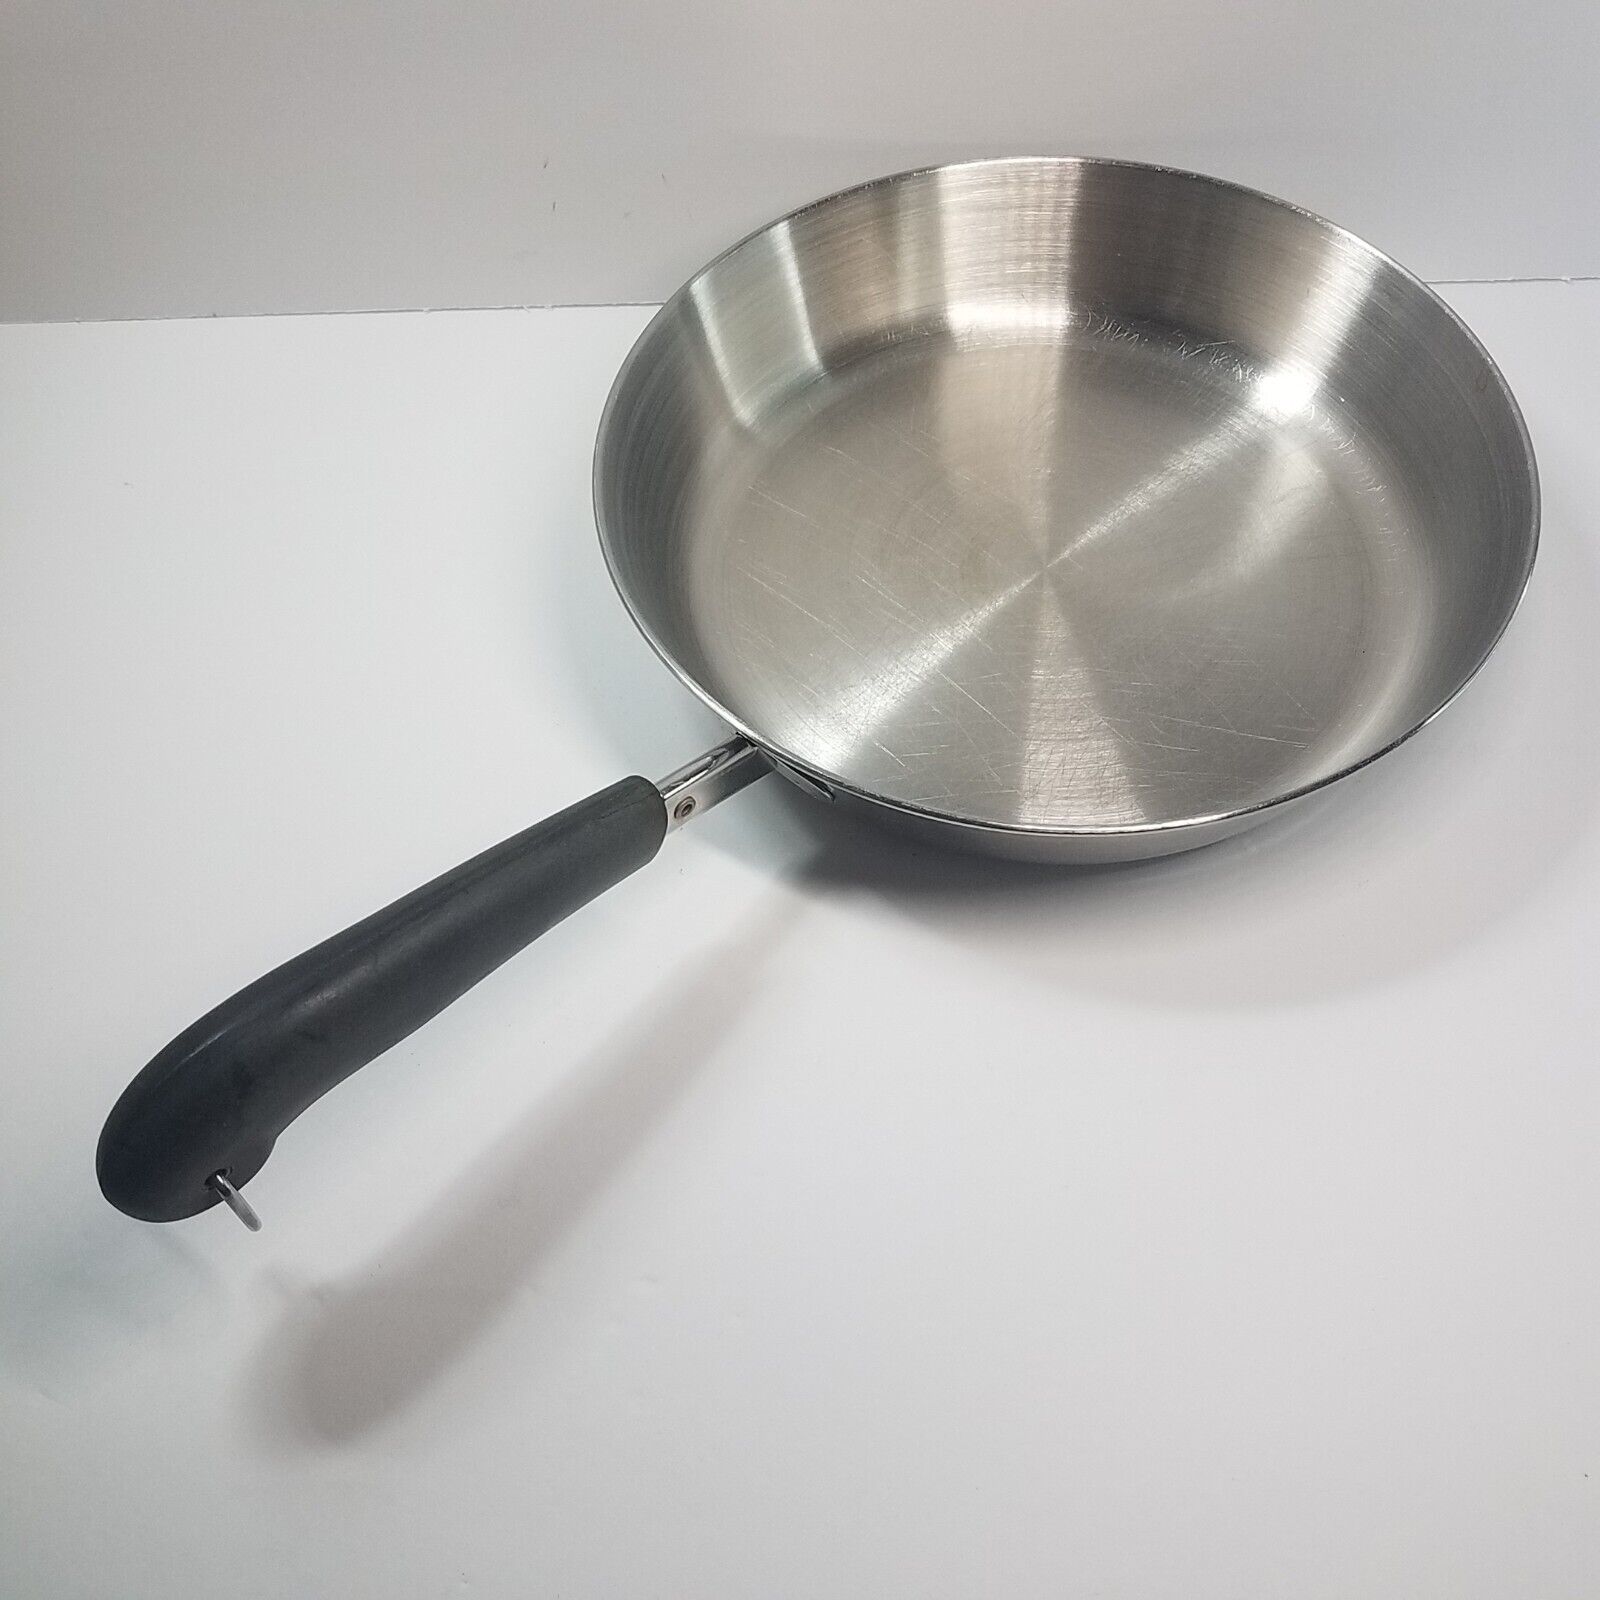 Vintage Revere Ware 9 Inch Skillet Fry Pan Tri Ply Disc Bottom Stainless Steel